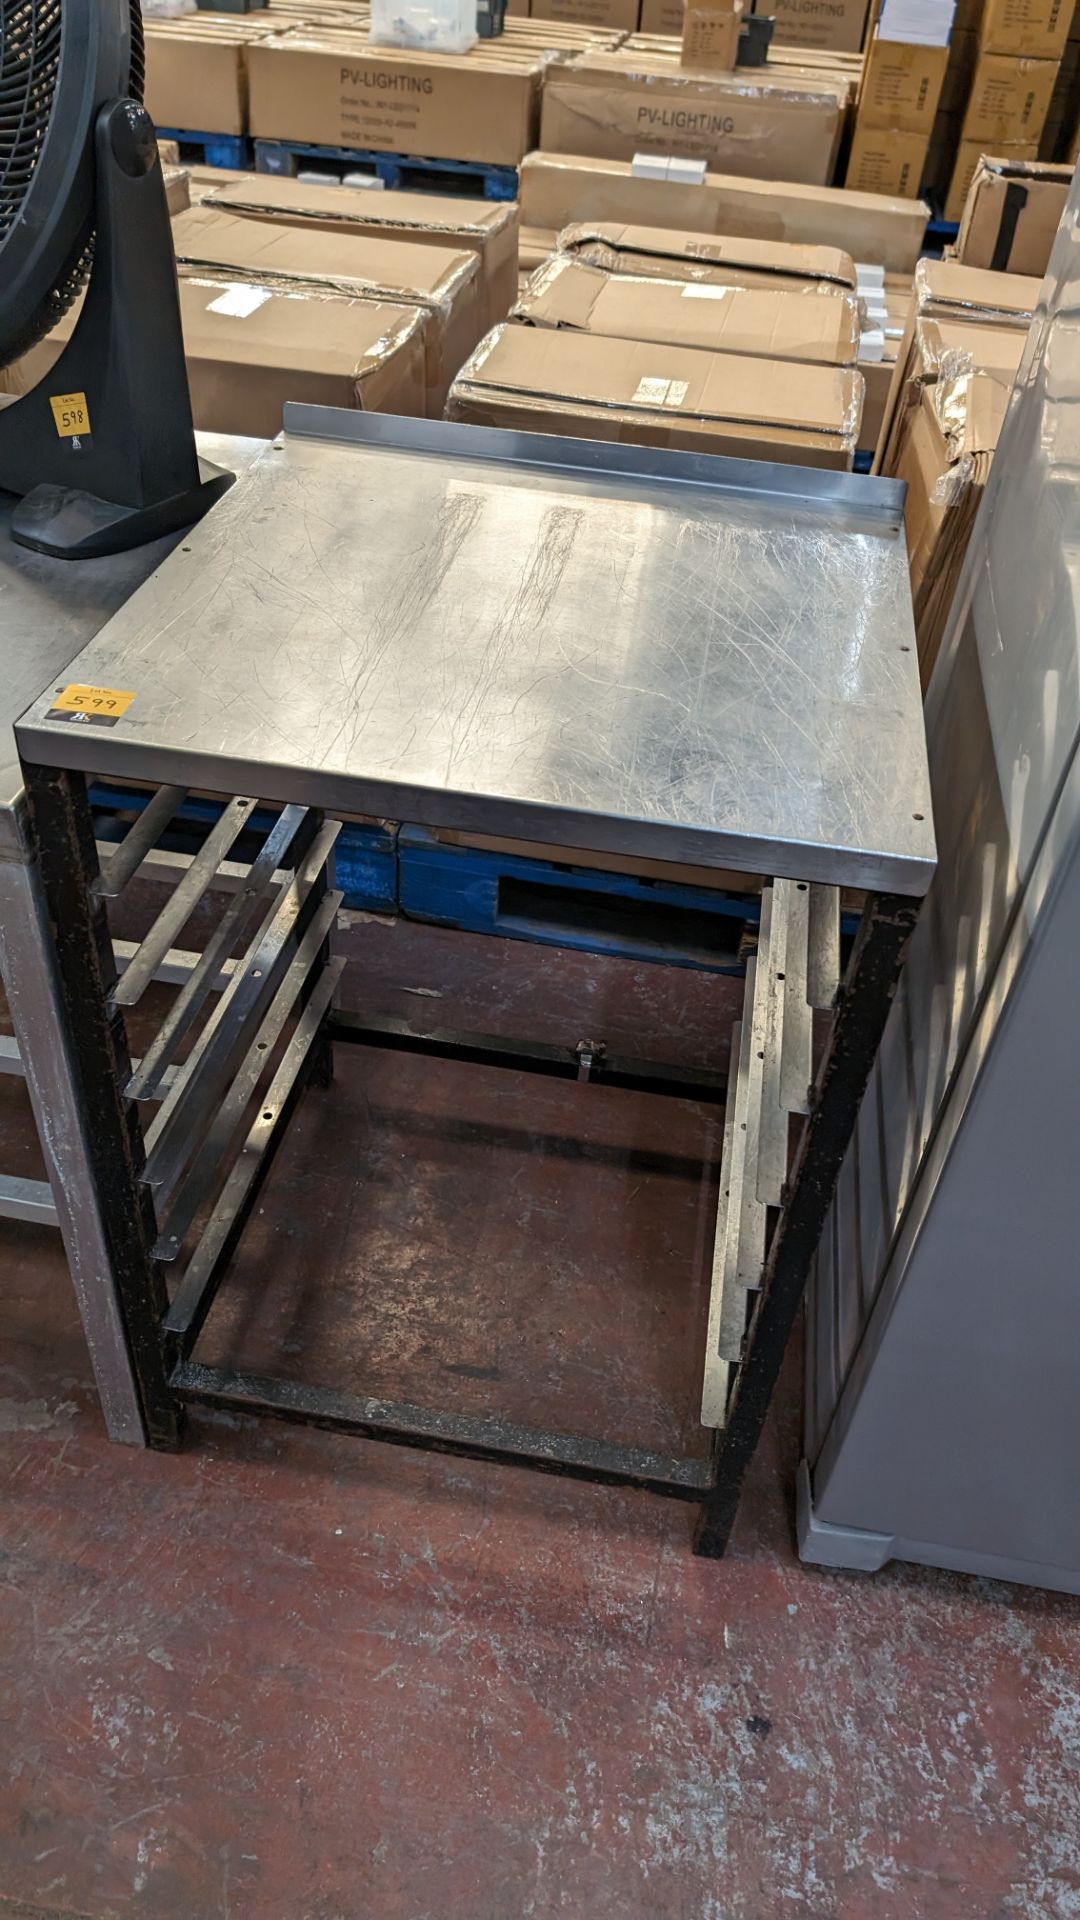 Stainless steel table with capacity for holding trays below, assumed to be for use for commercial di - Bild 4 aus 4